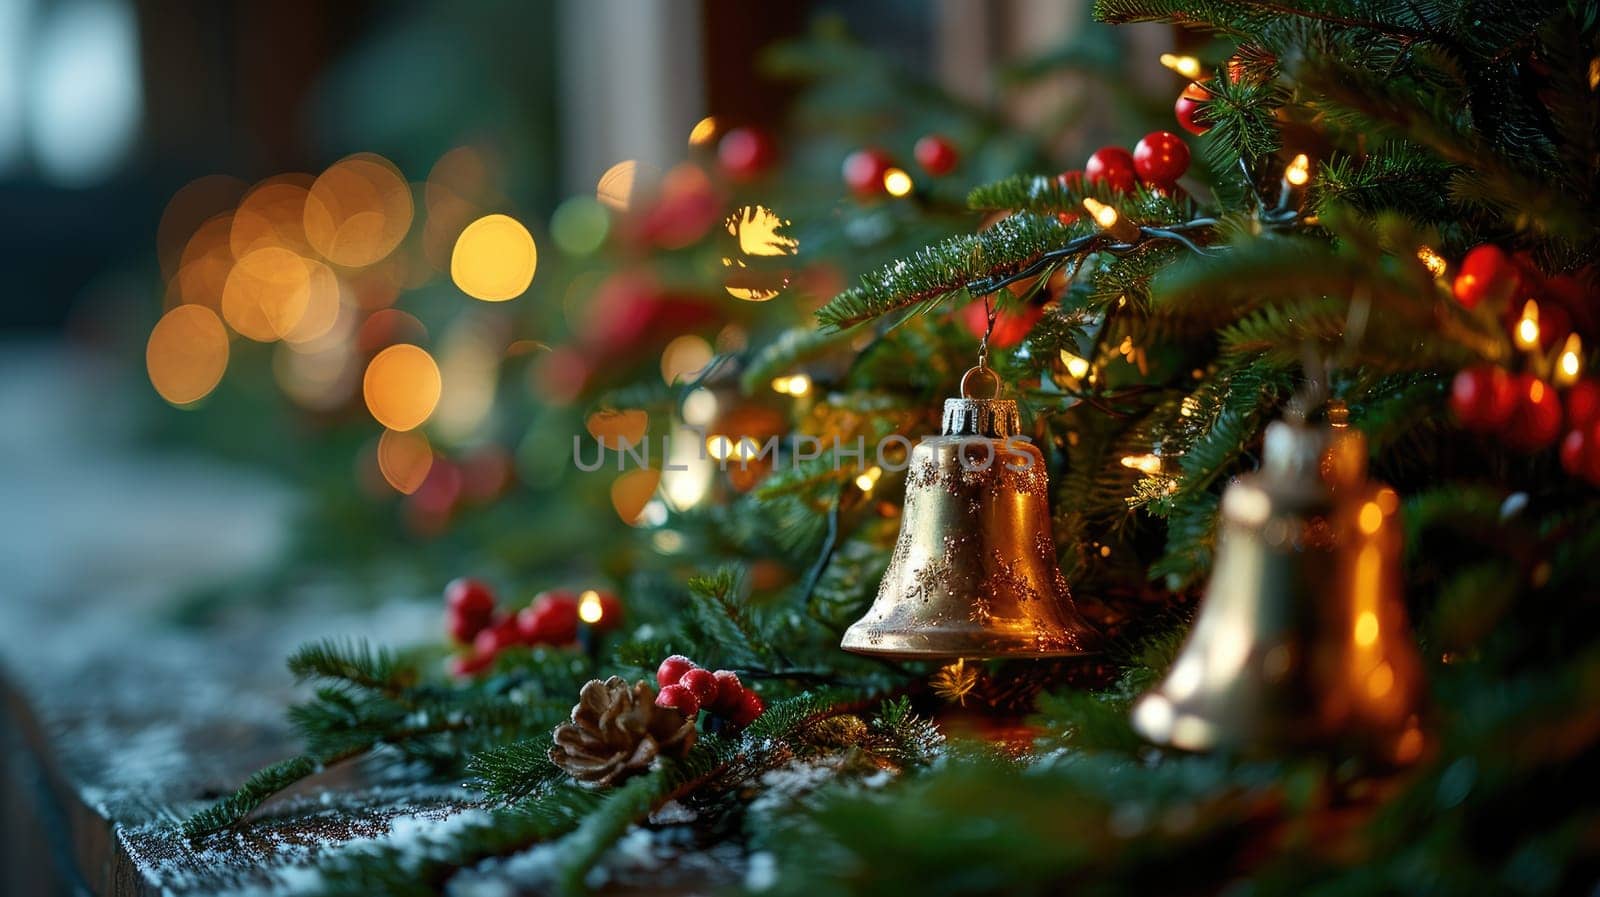 A magnificent image: golden bells perfectly complement the festive Christmas tree with a bright garland, filling the room with magic and joy.